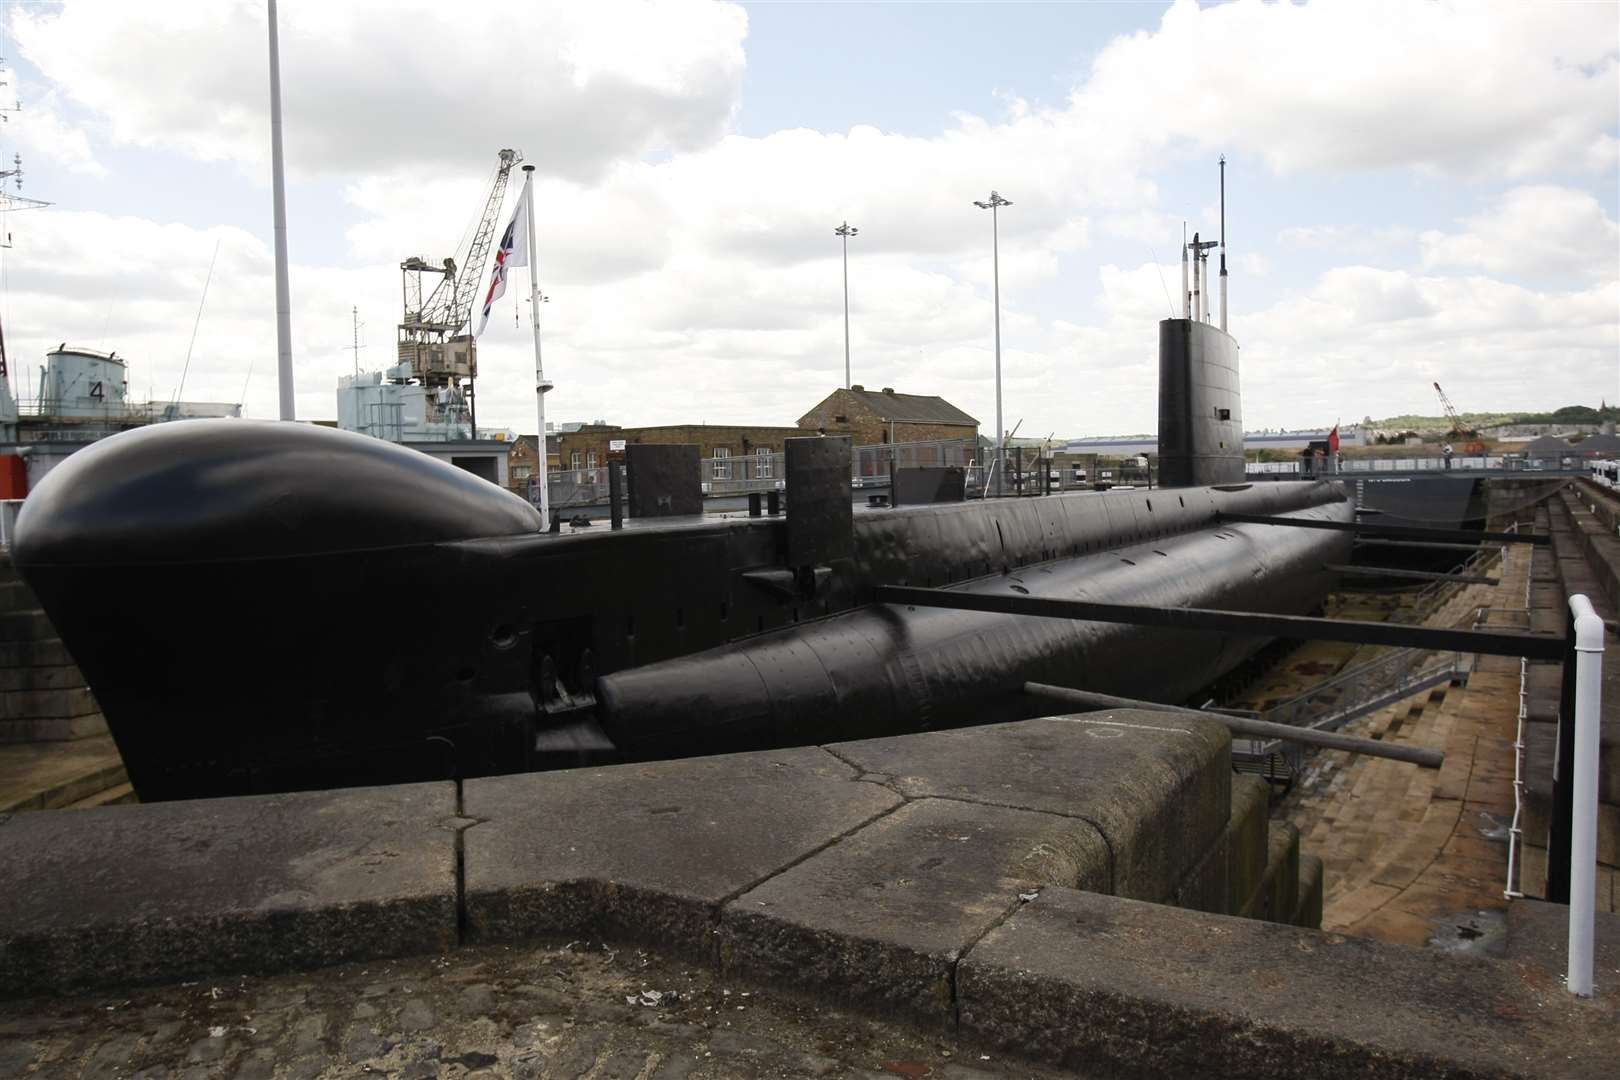 HMS Ocelot was also launched at Chatham and is now an attraction at the Historic Dockyard